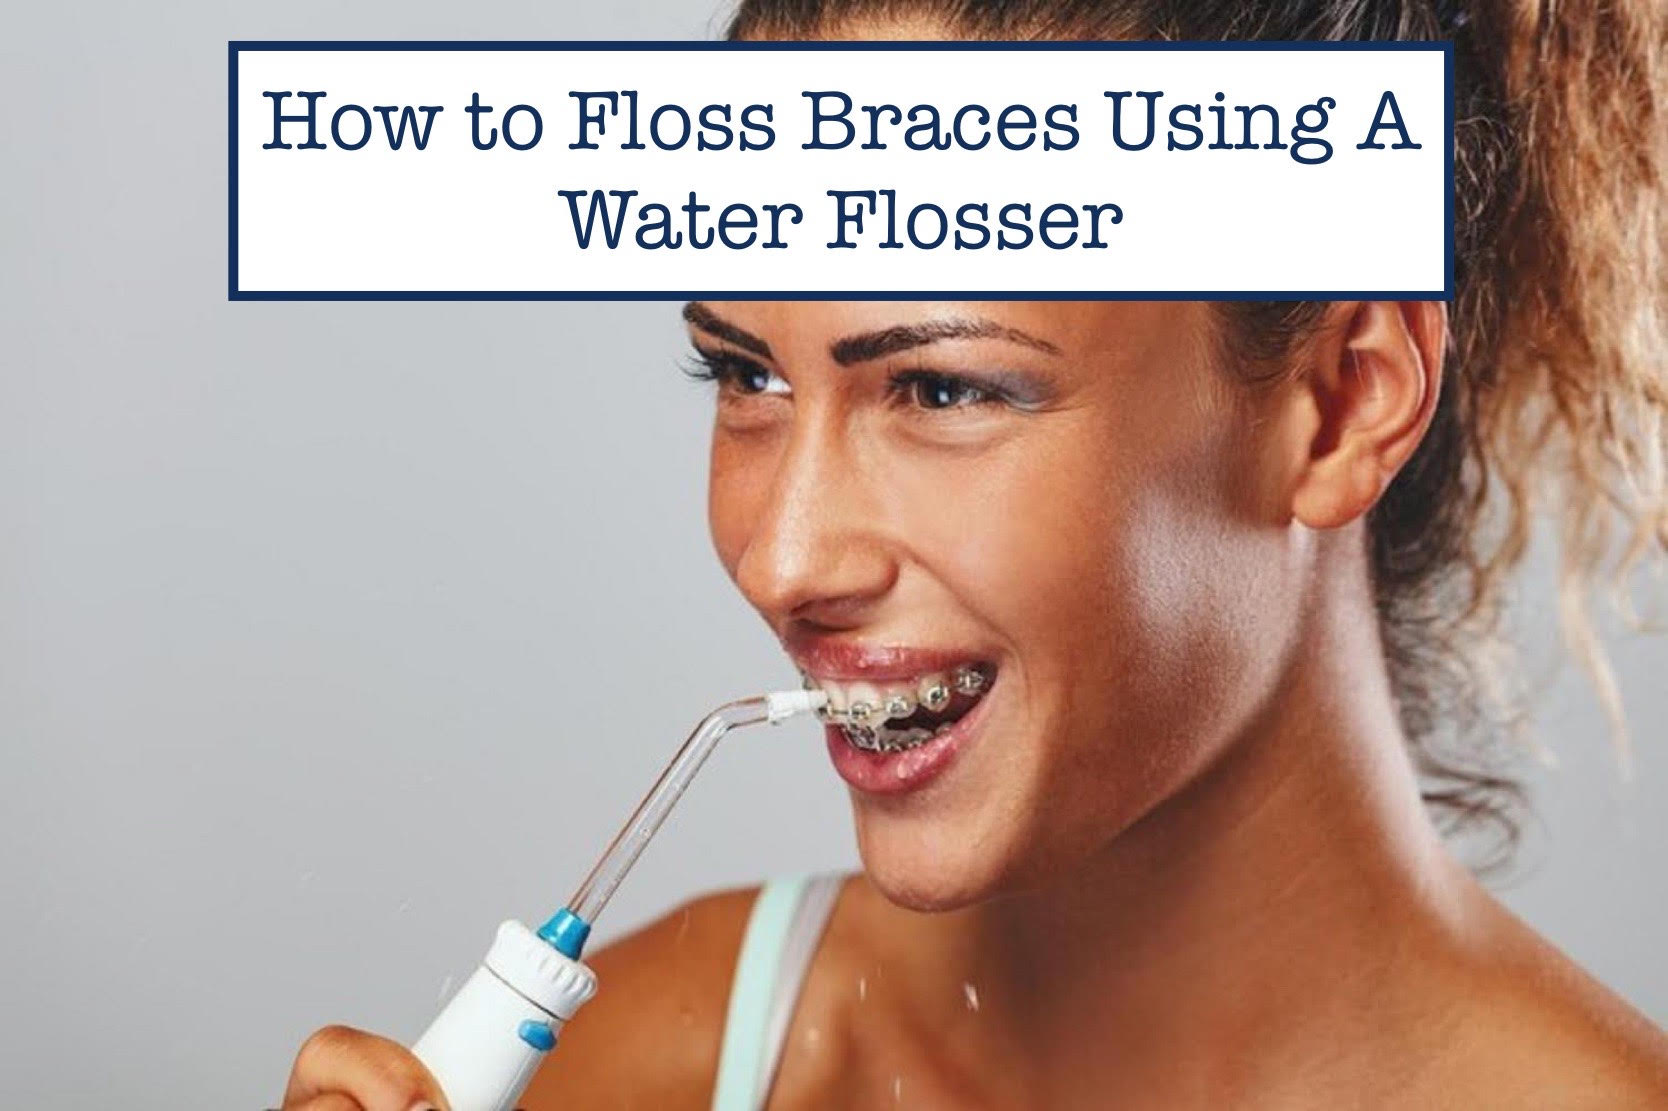 How to Floss Braces Using A Water Flosser